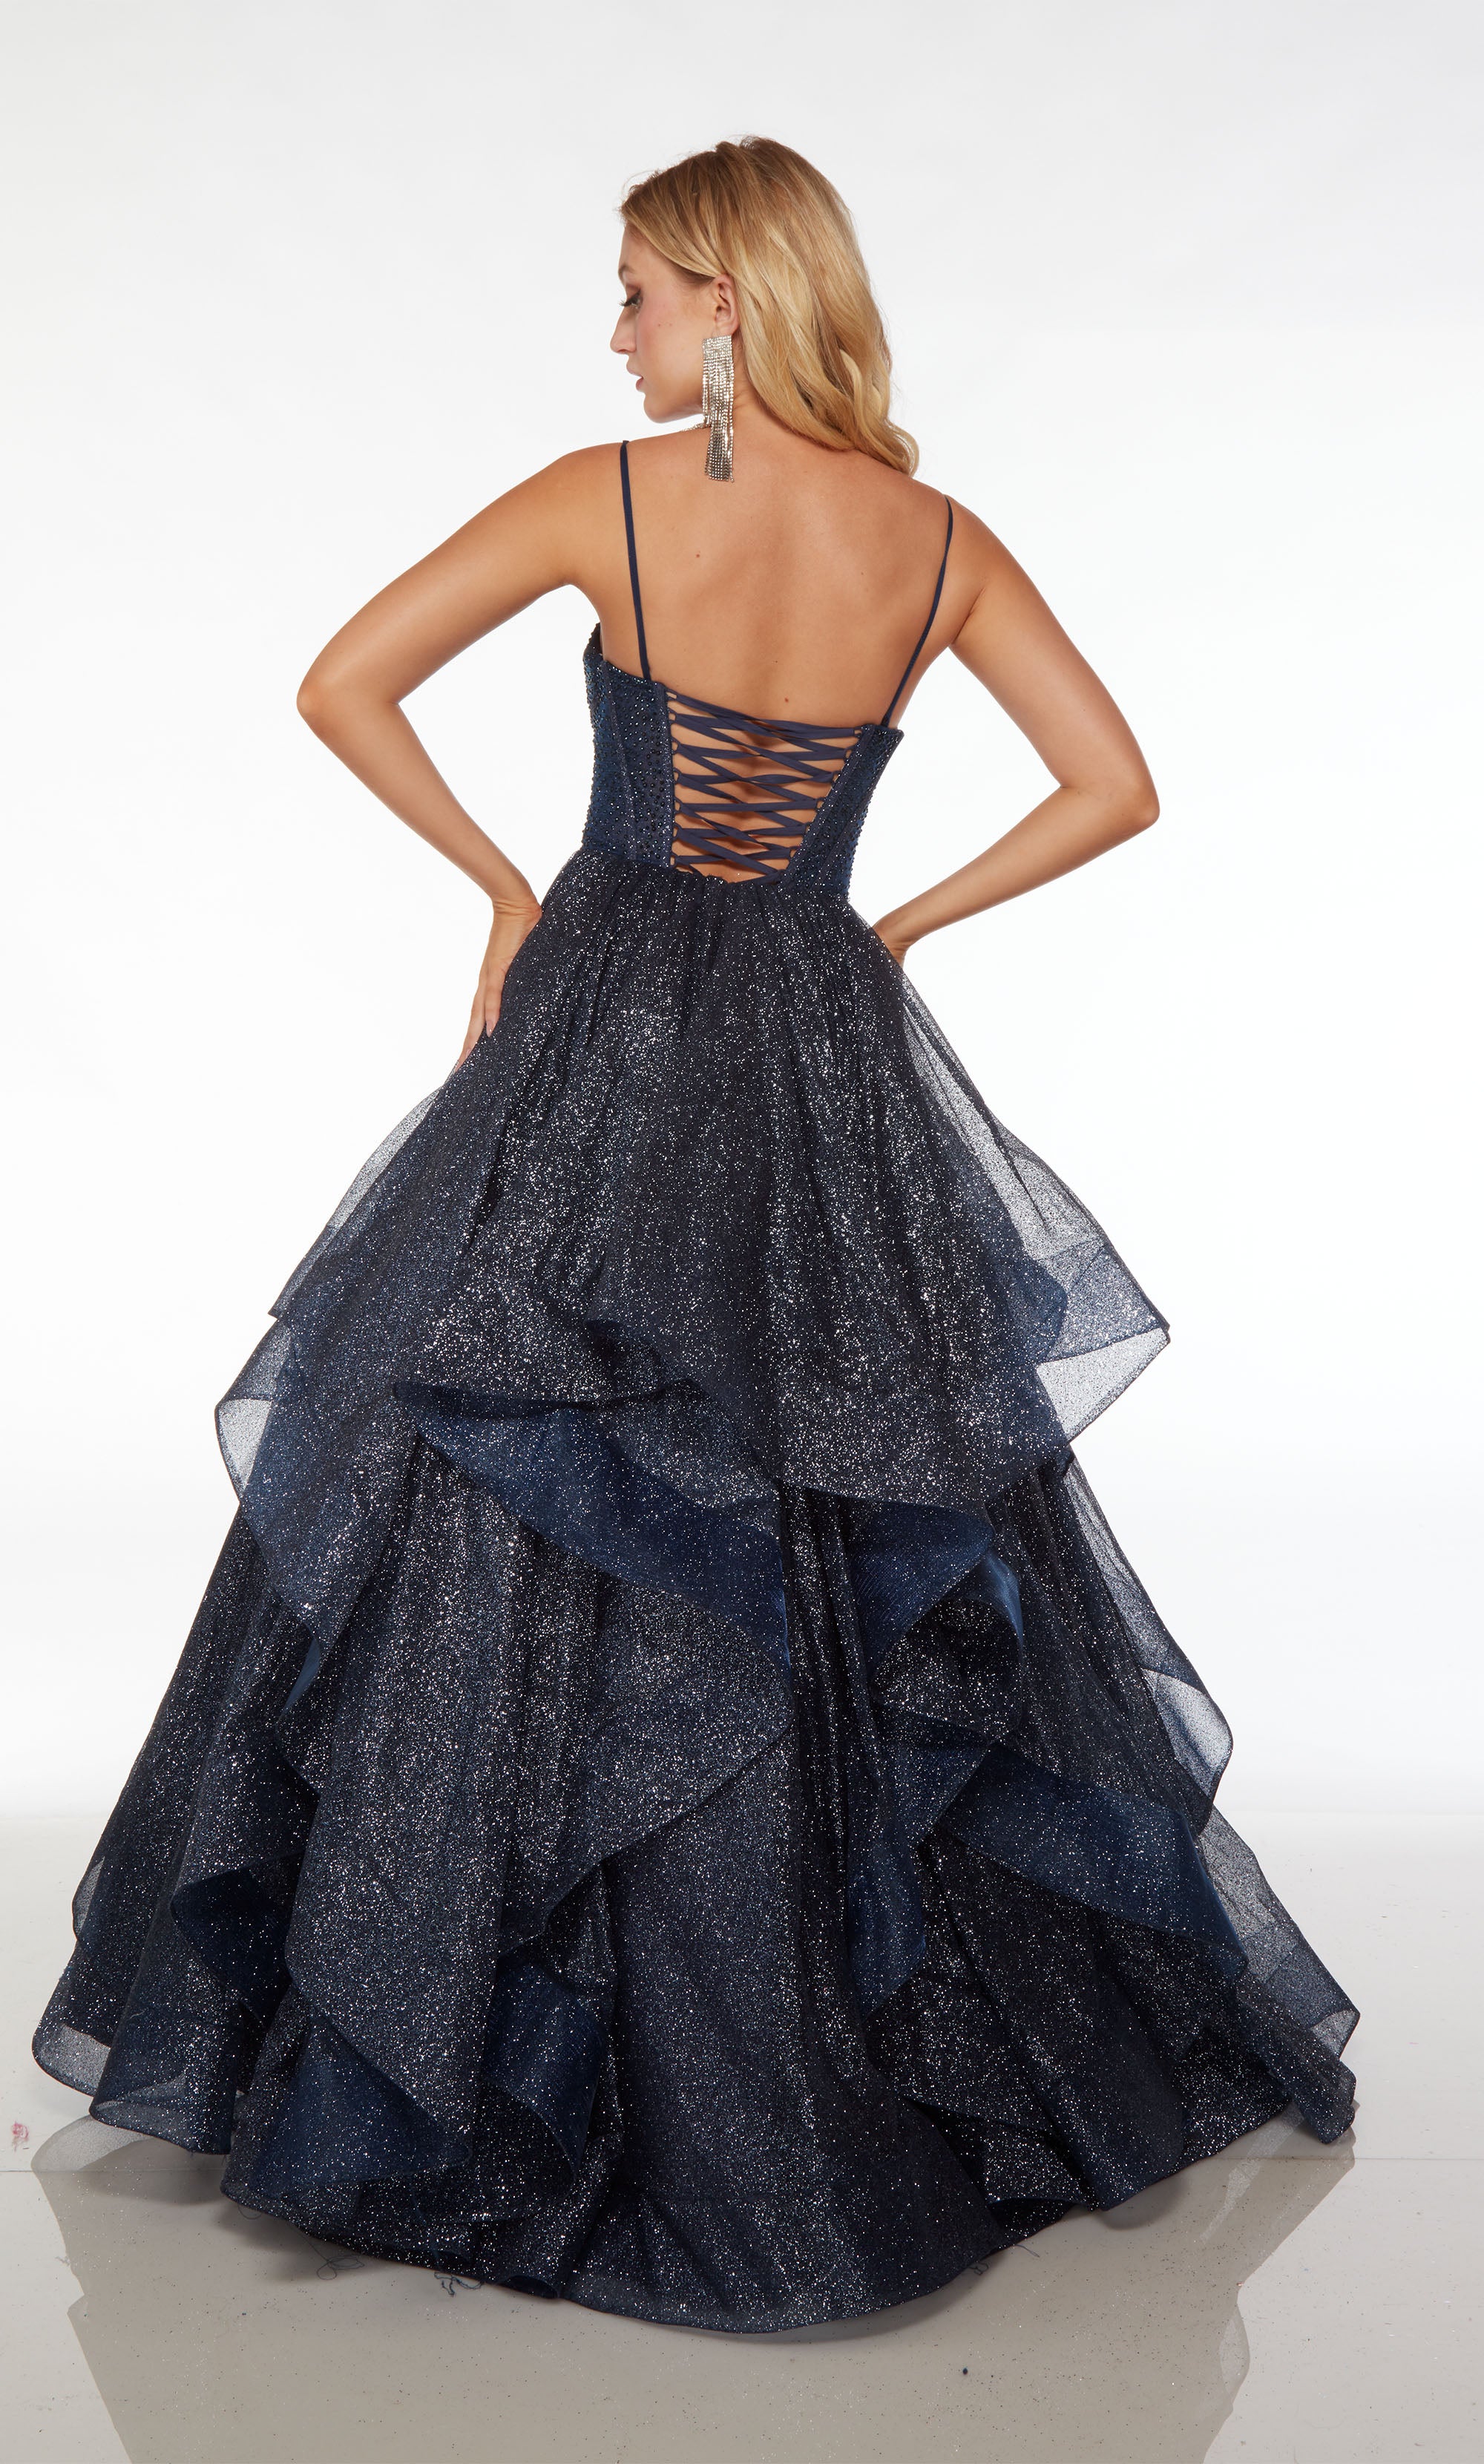 Midnight blue glitter tulle ball gown: hotfix embellished corset bodice, ruffled skirt, lace-up back for the perfect custom fit and elegant allure.